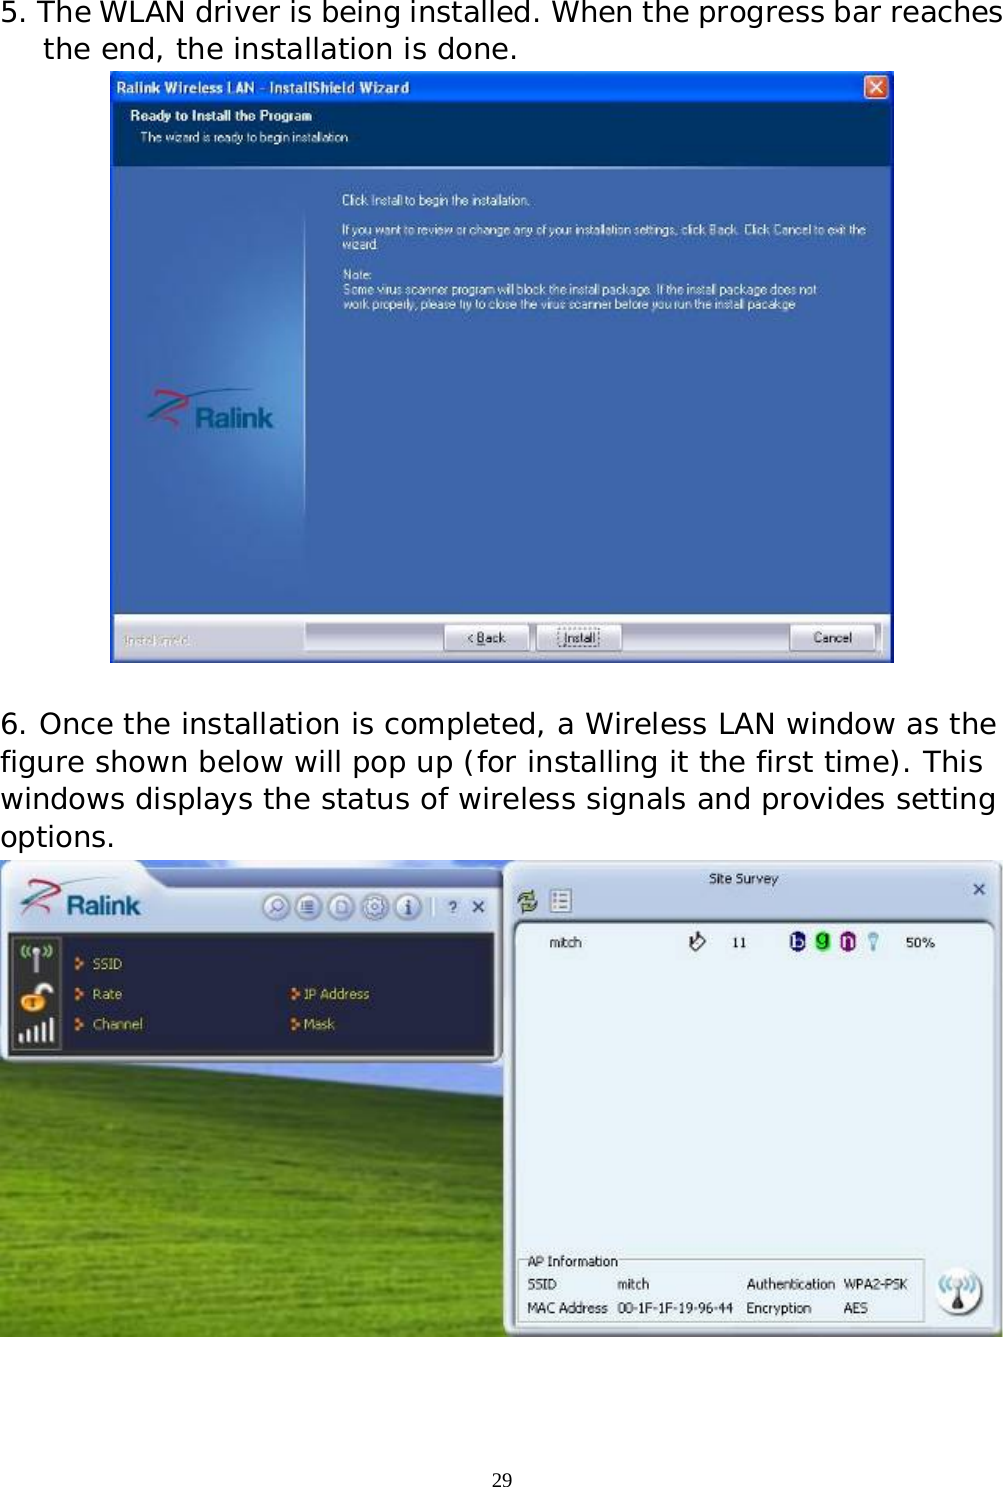  29 5. The WLAN driver is being installed. When the progress bar reaches the end, the installation is done.   6. Once the installation is completed, a Wireless LAN window as the figure shown below will pop up (for installing it the first time). This windows displays the status of wireless signals and provides setting options.    